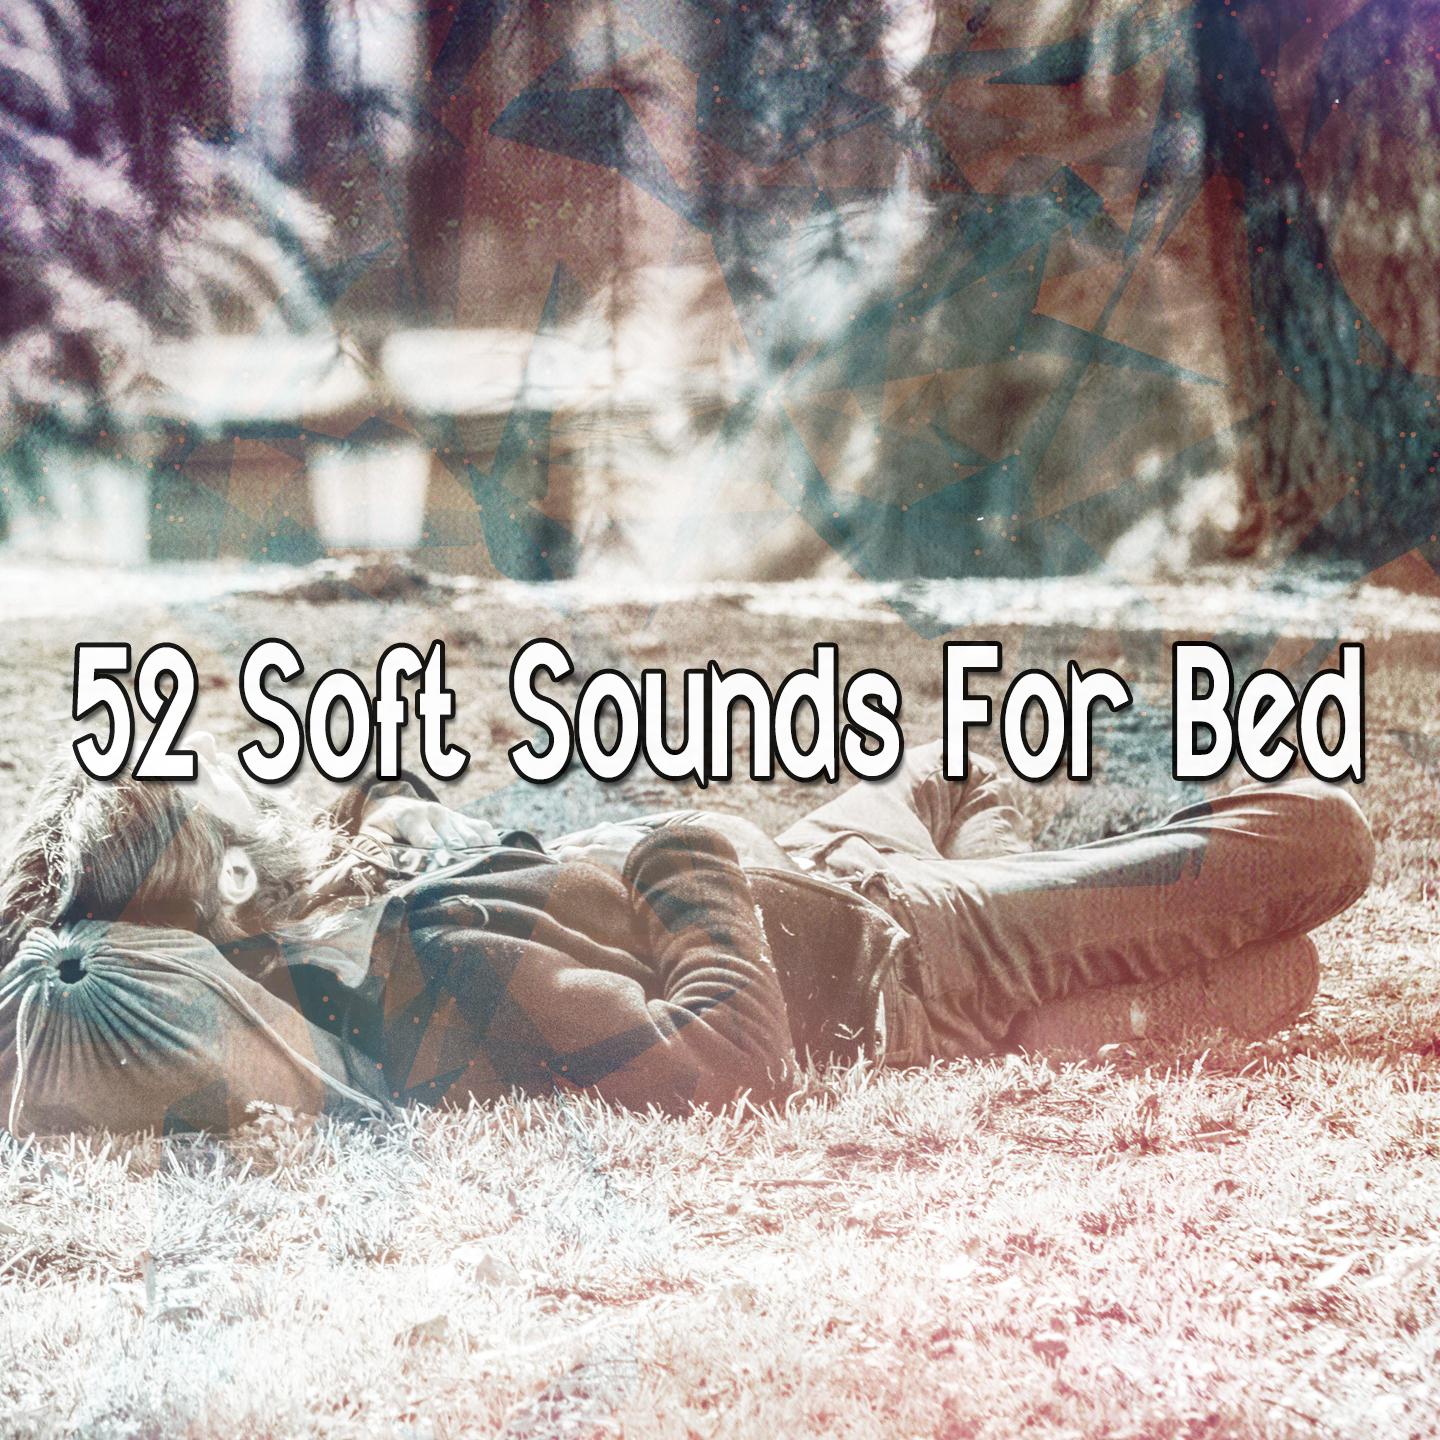 52 Soft Sounds For Bed